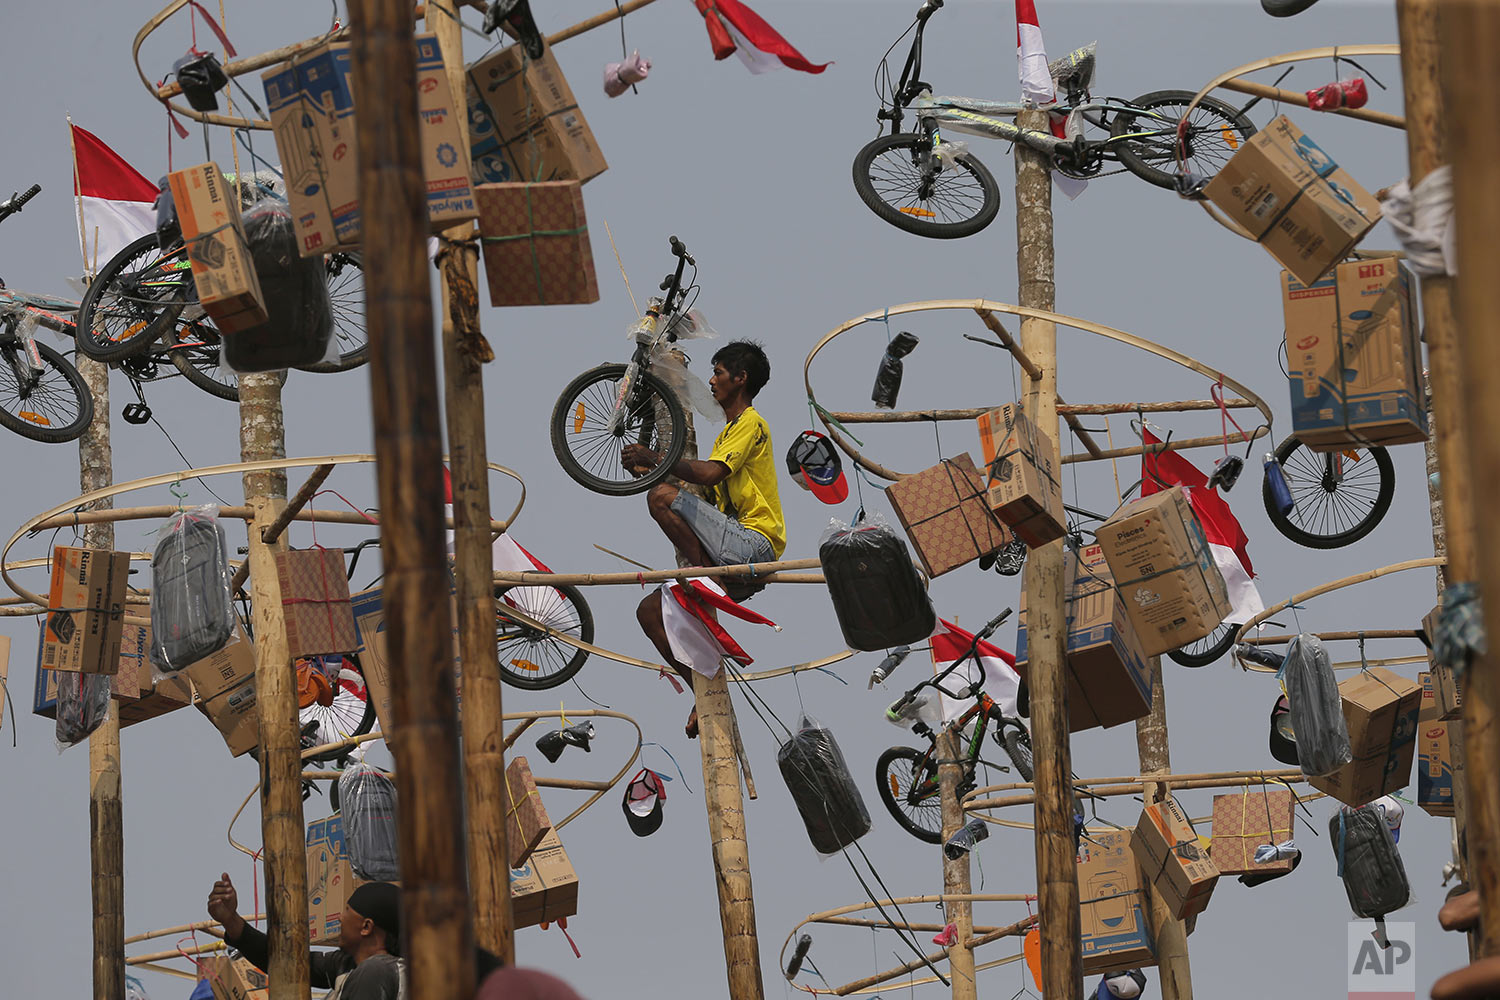  An Indonesian man retrieves his prize after climbing up a greased pole during a greased-pole climbing competition held as part of Independence Day celebrations at Ancol Beach in Jakarta, Indonesia, Saturday, Aug. 17, 2019. (AP Photo/Tatan Syuflana) 